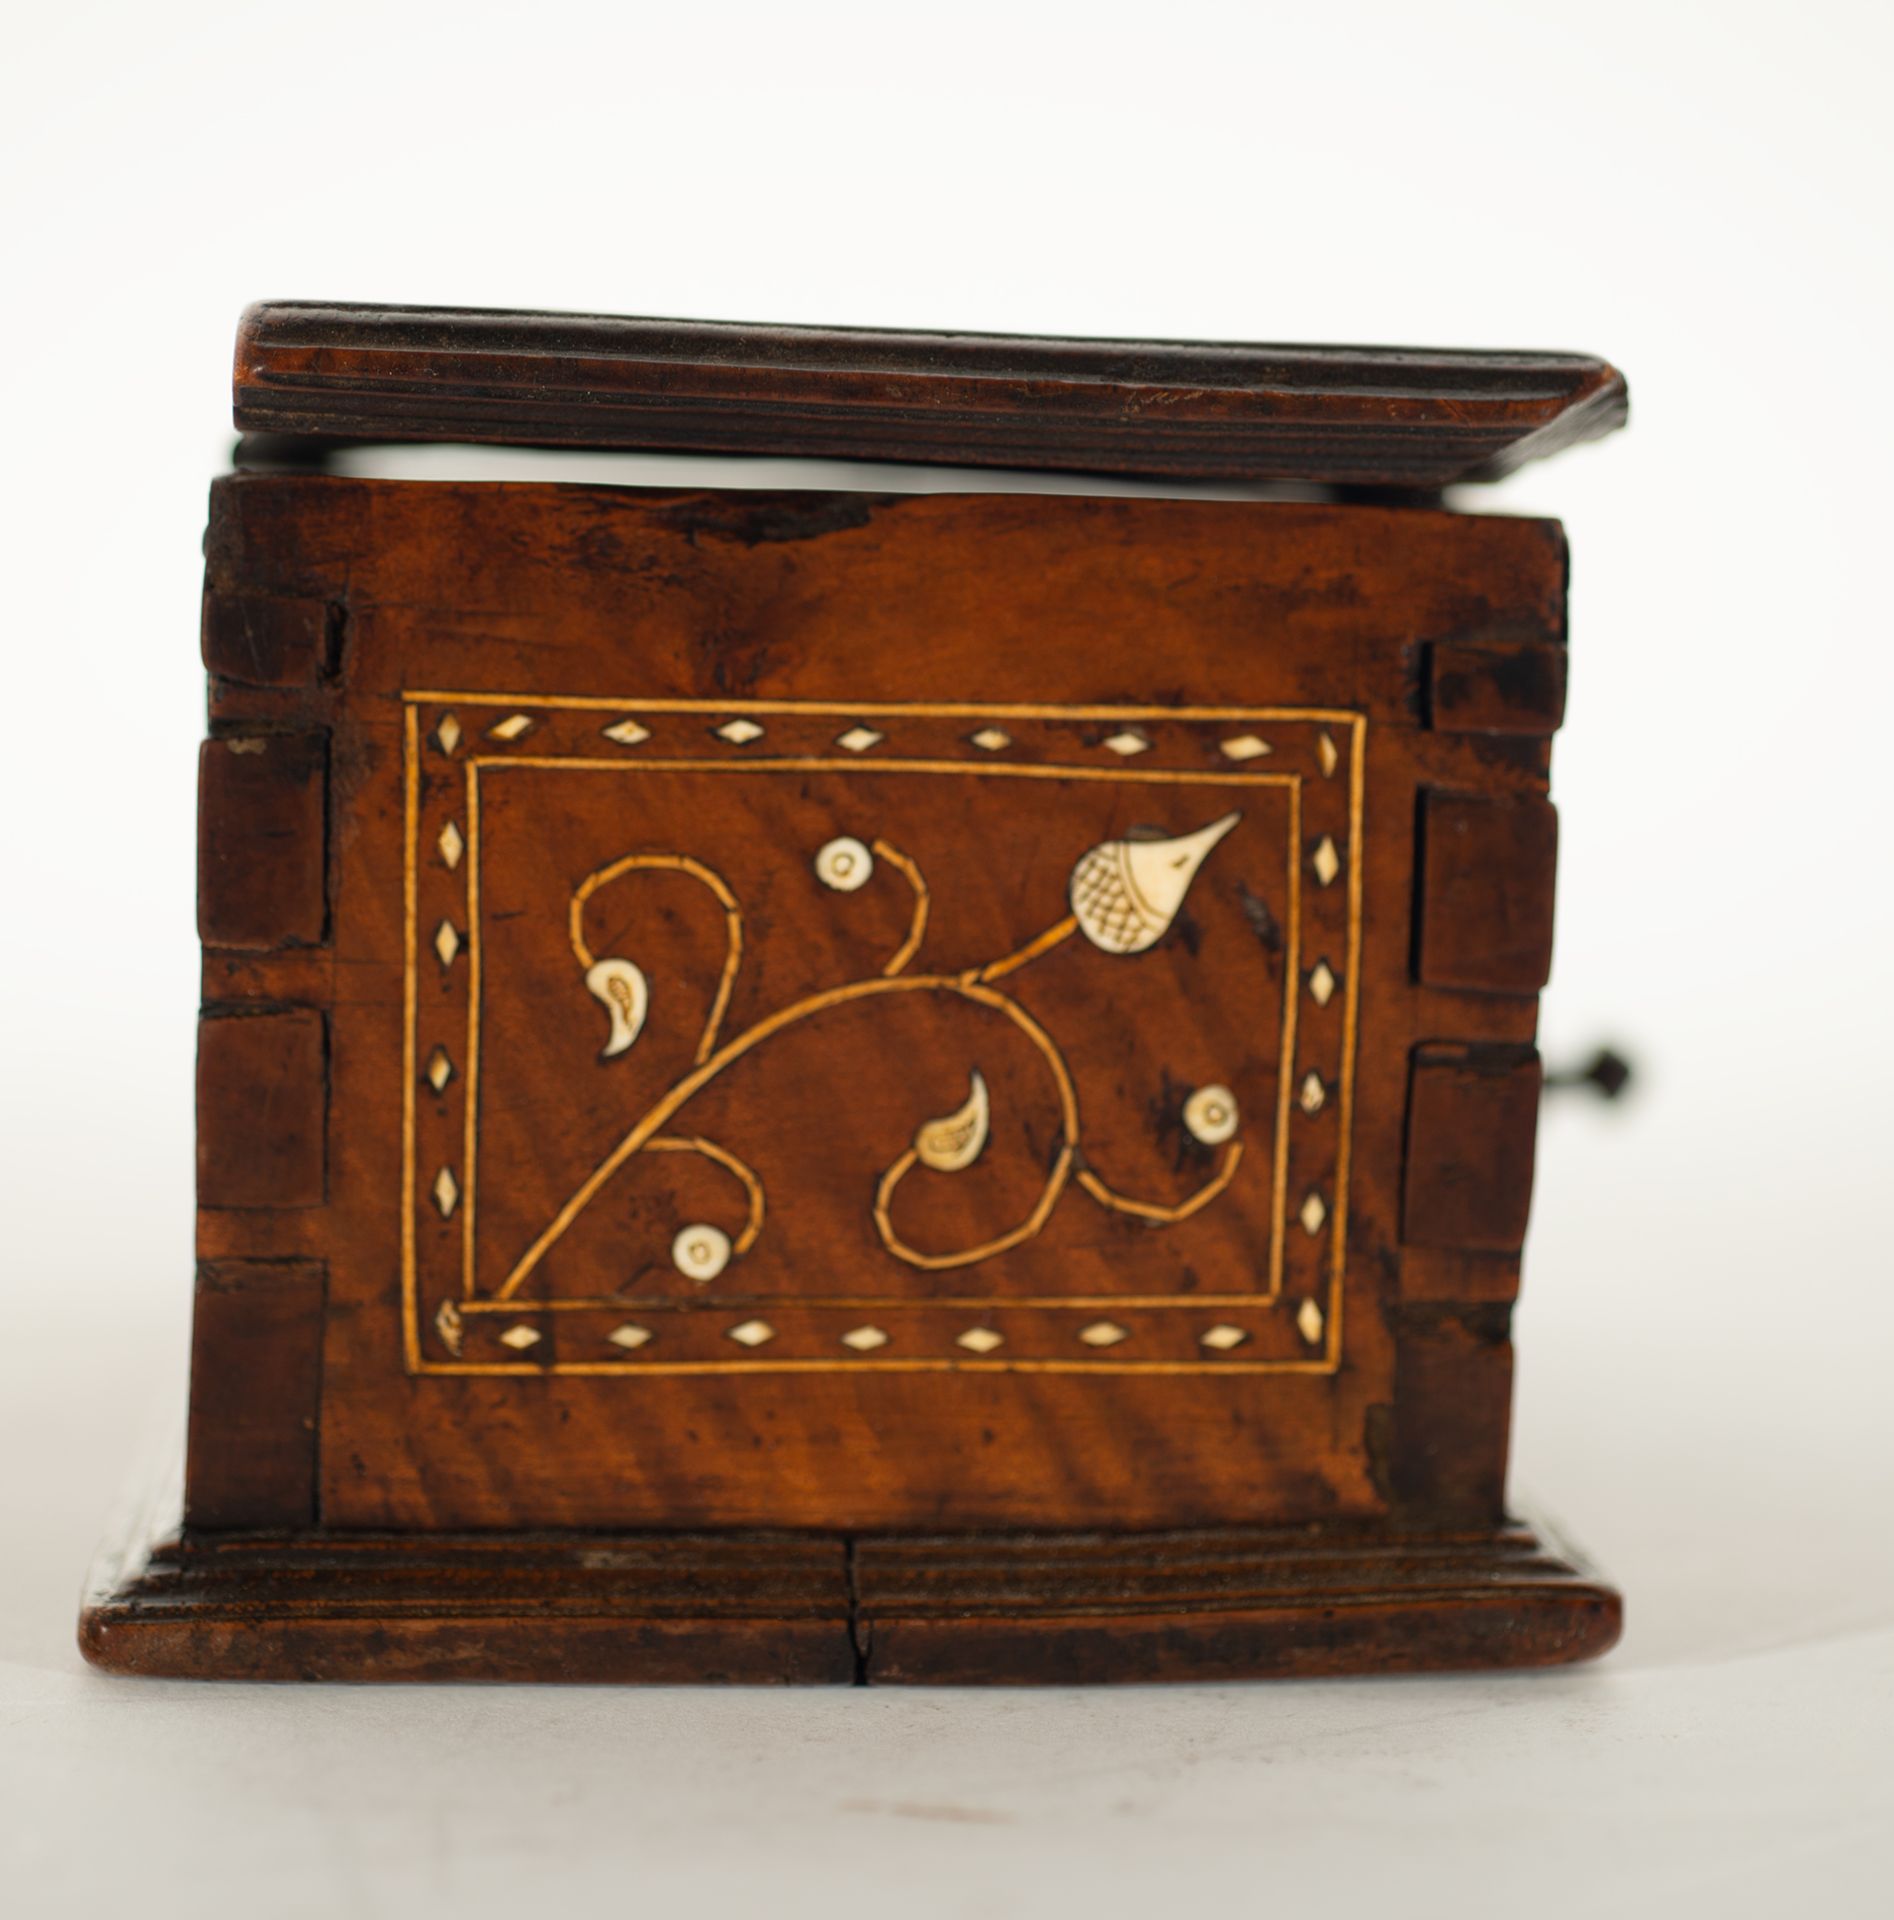 Plateresque style box in fruit wood and bone marquetry, Spanish school of the 19th - 20th centuries - Image 4 of 6